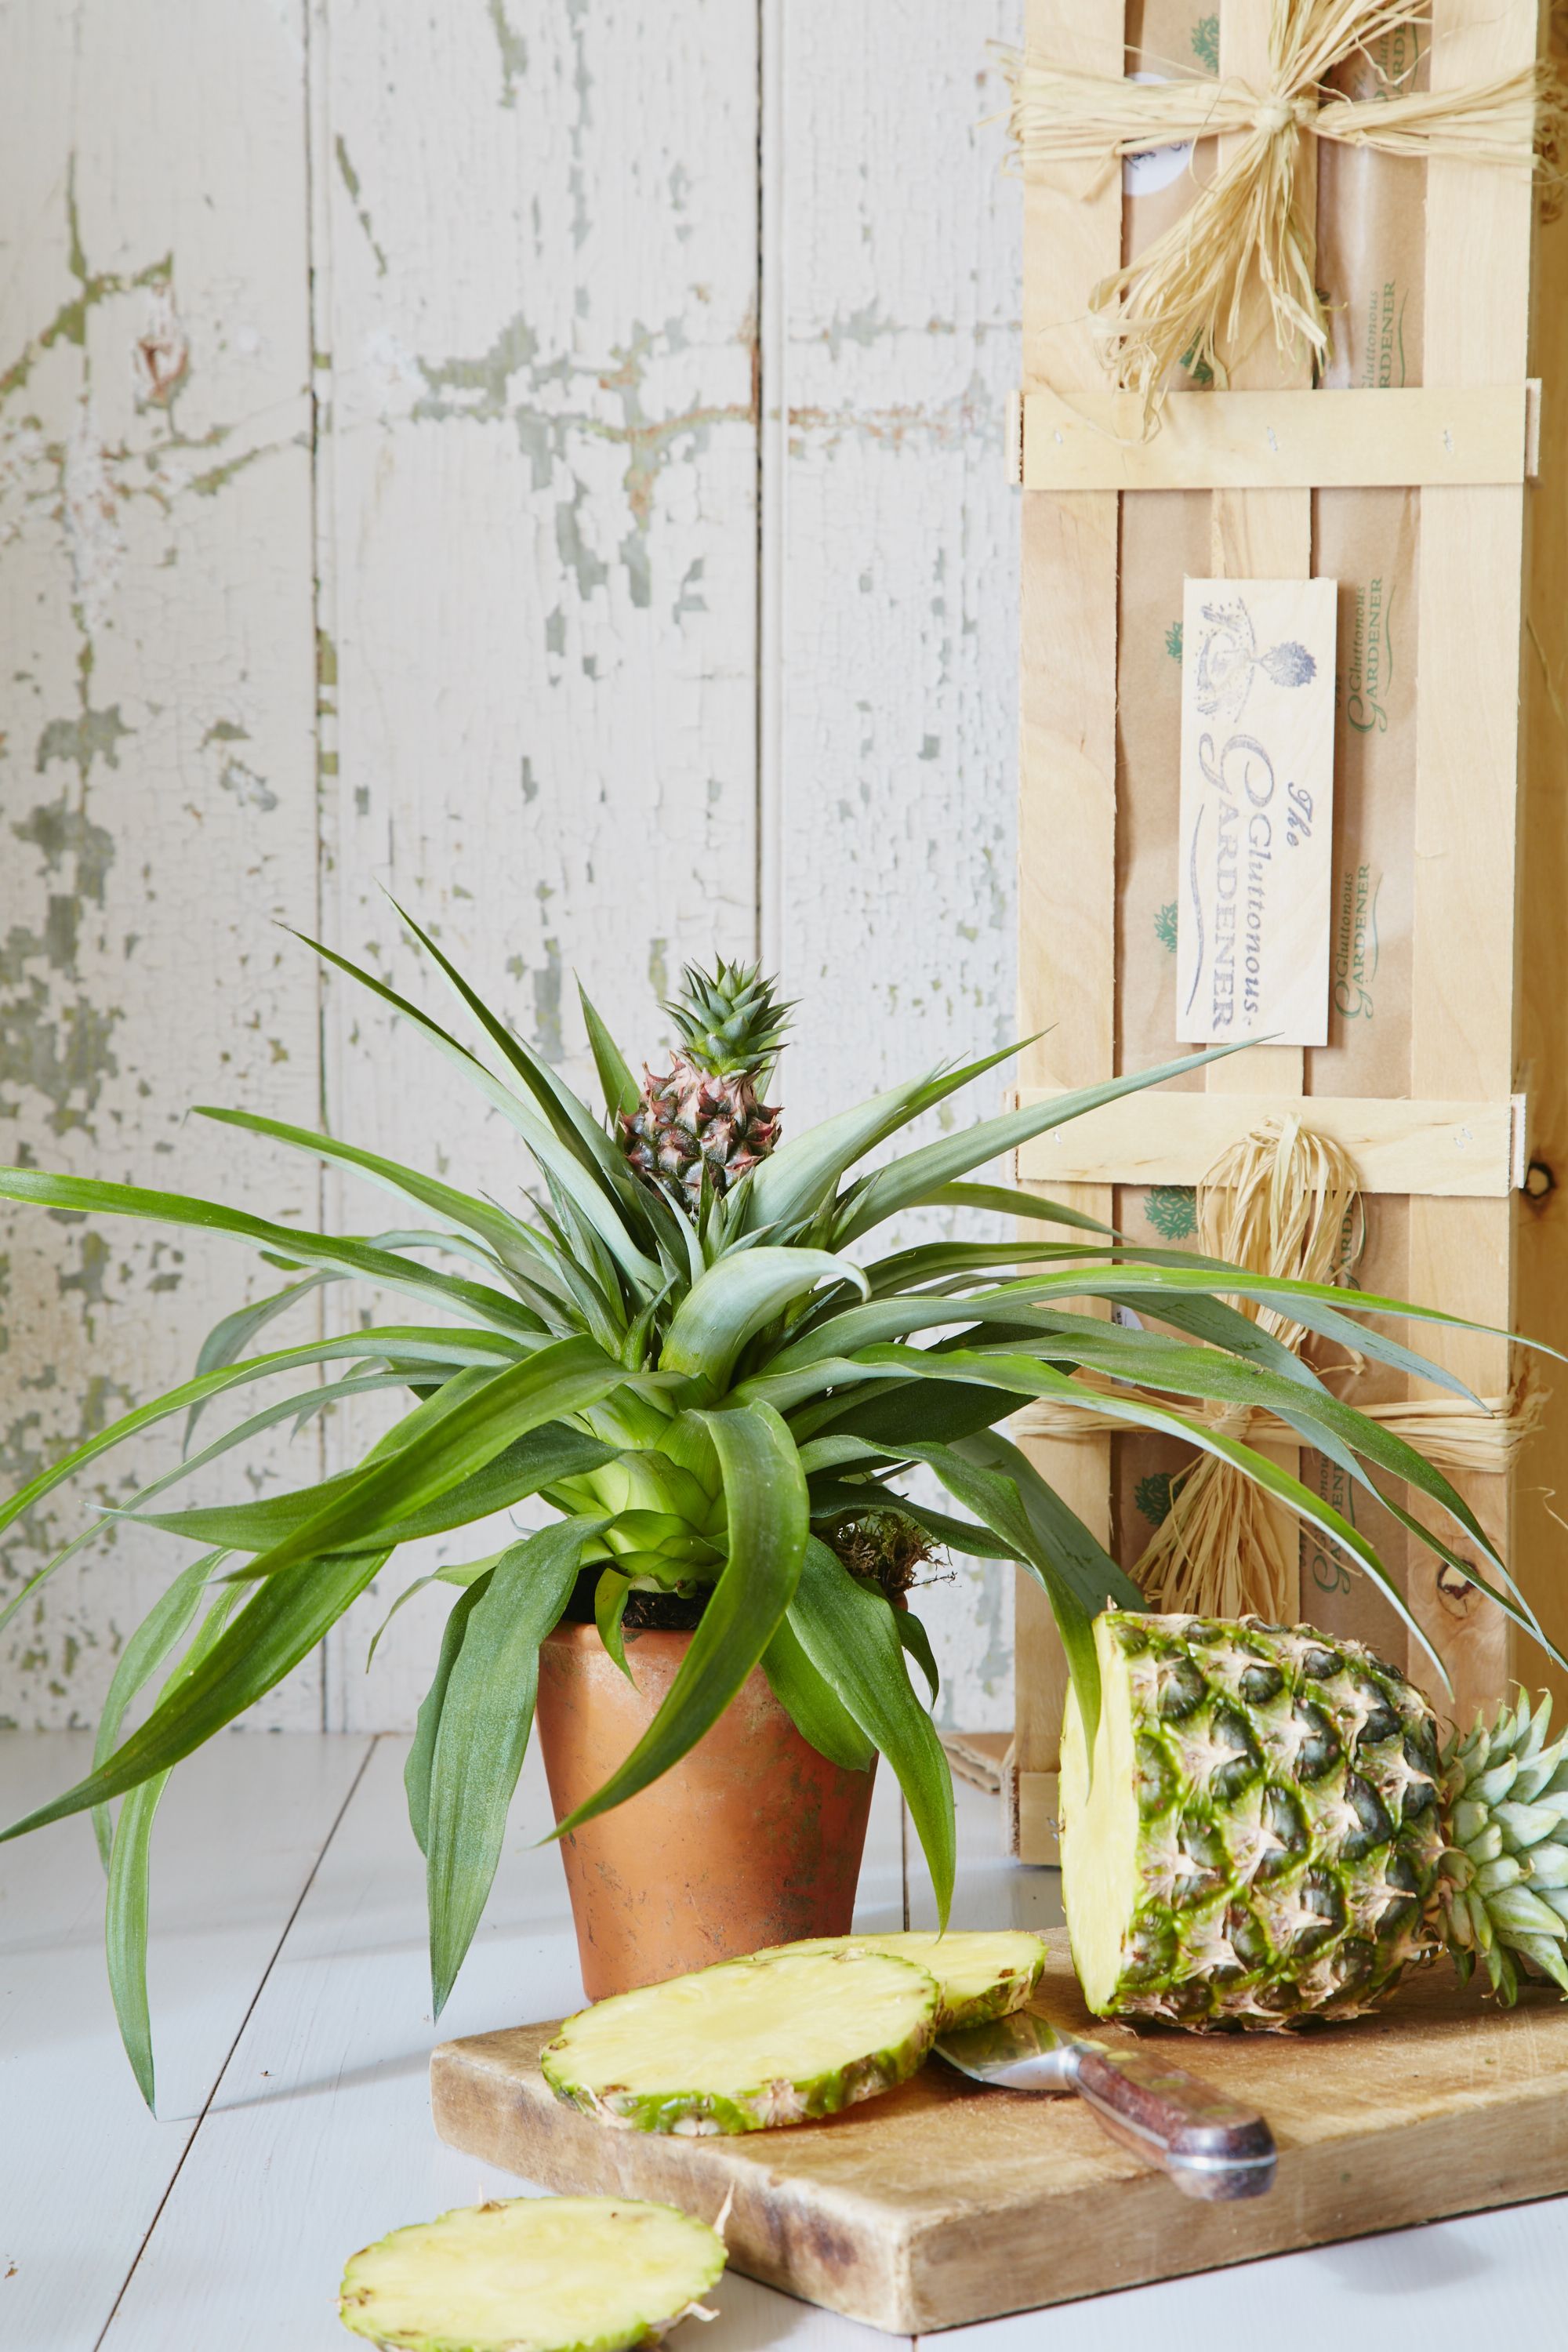 How to care for my pineapple plant